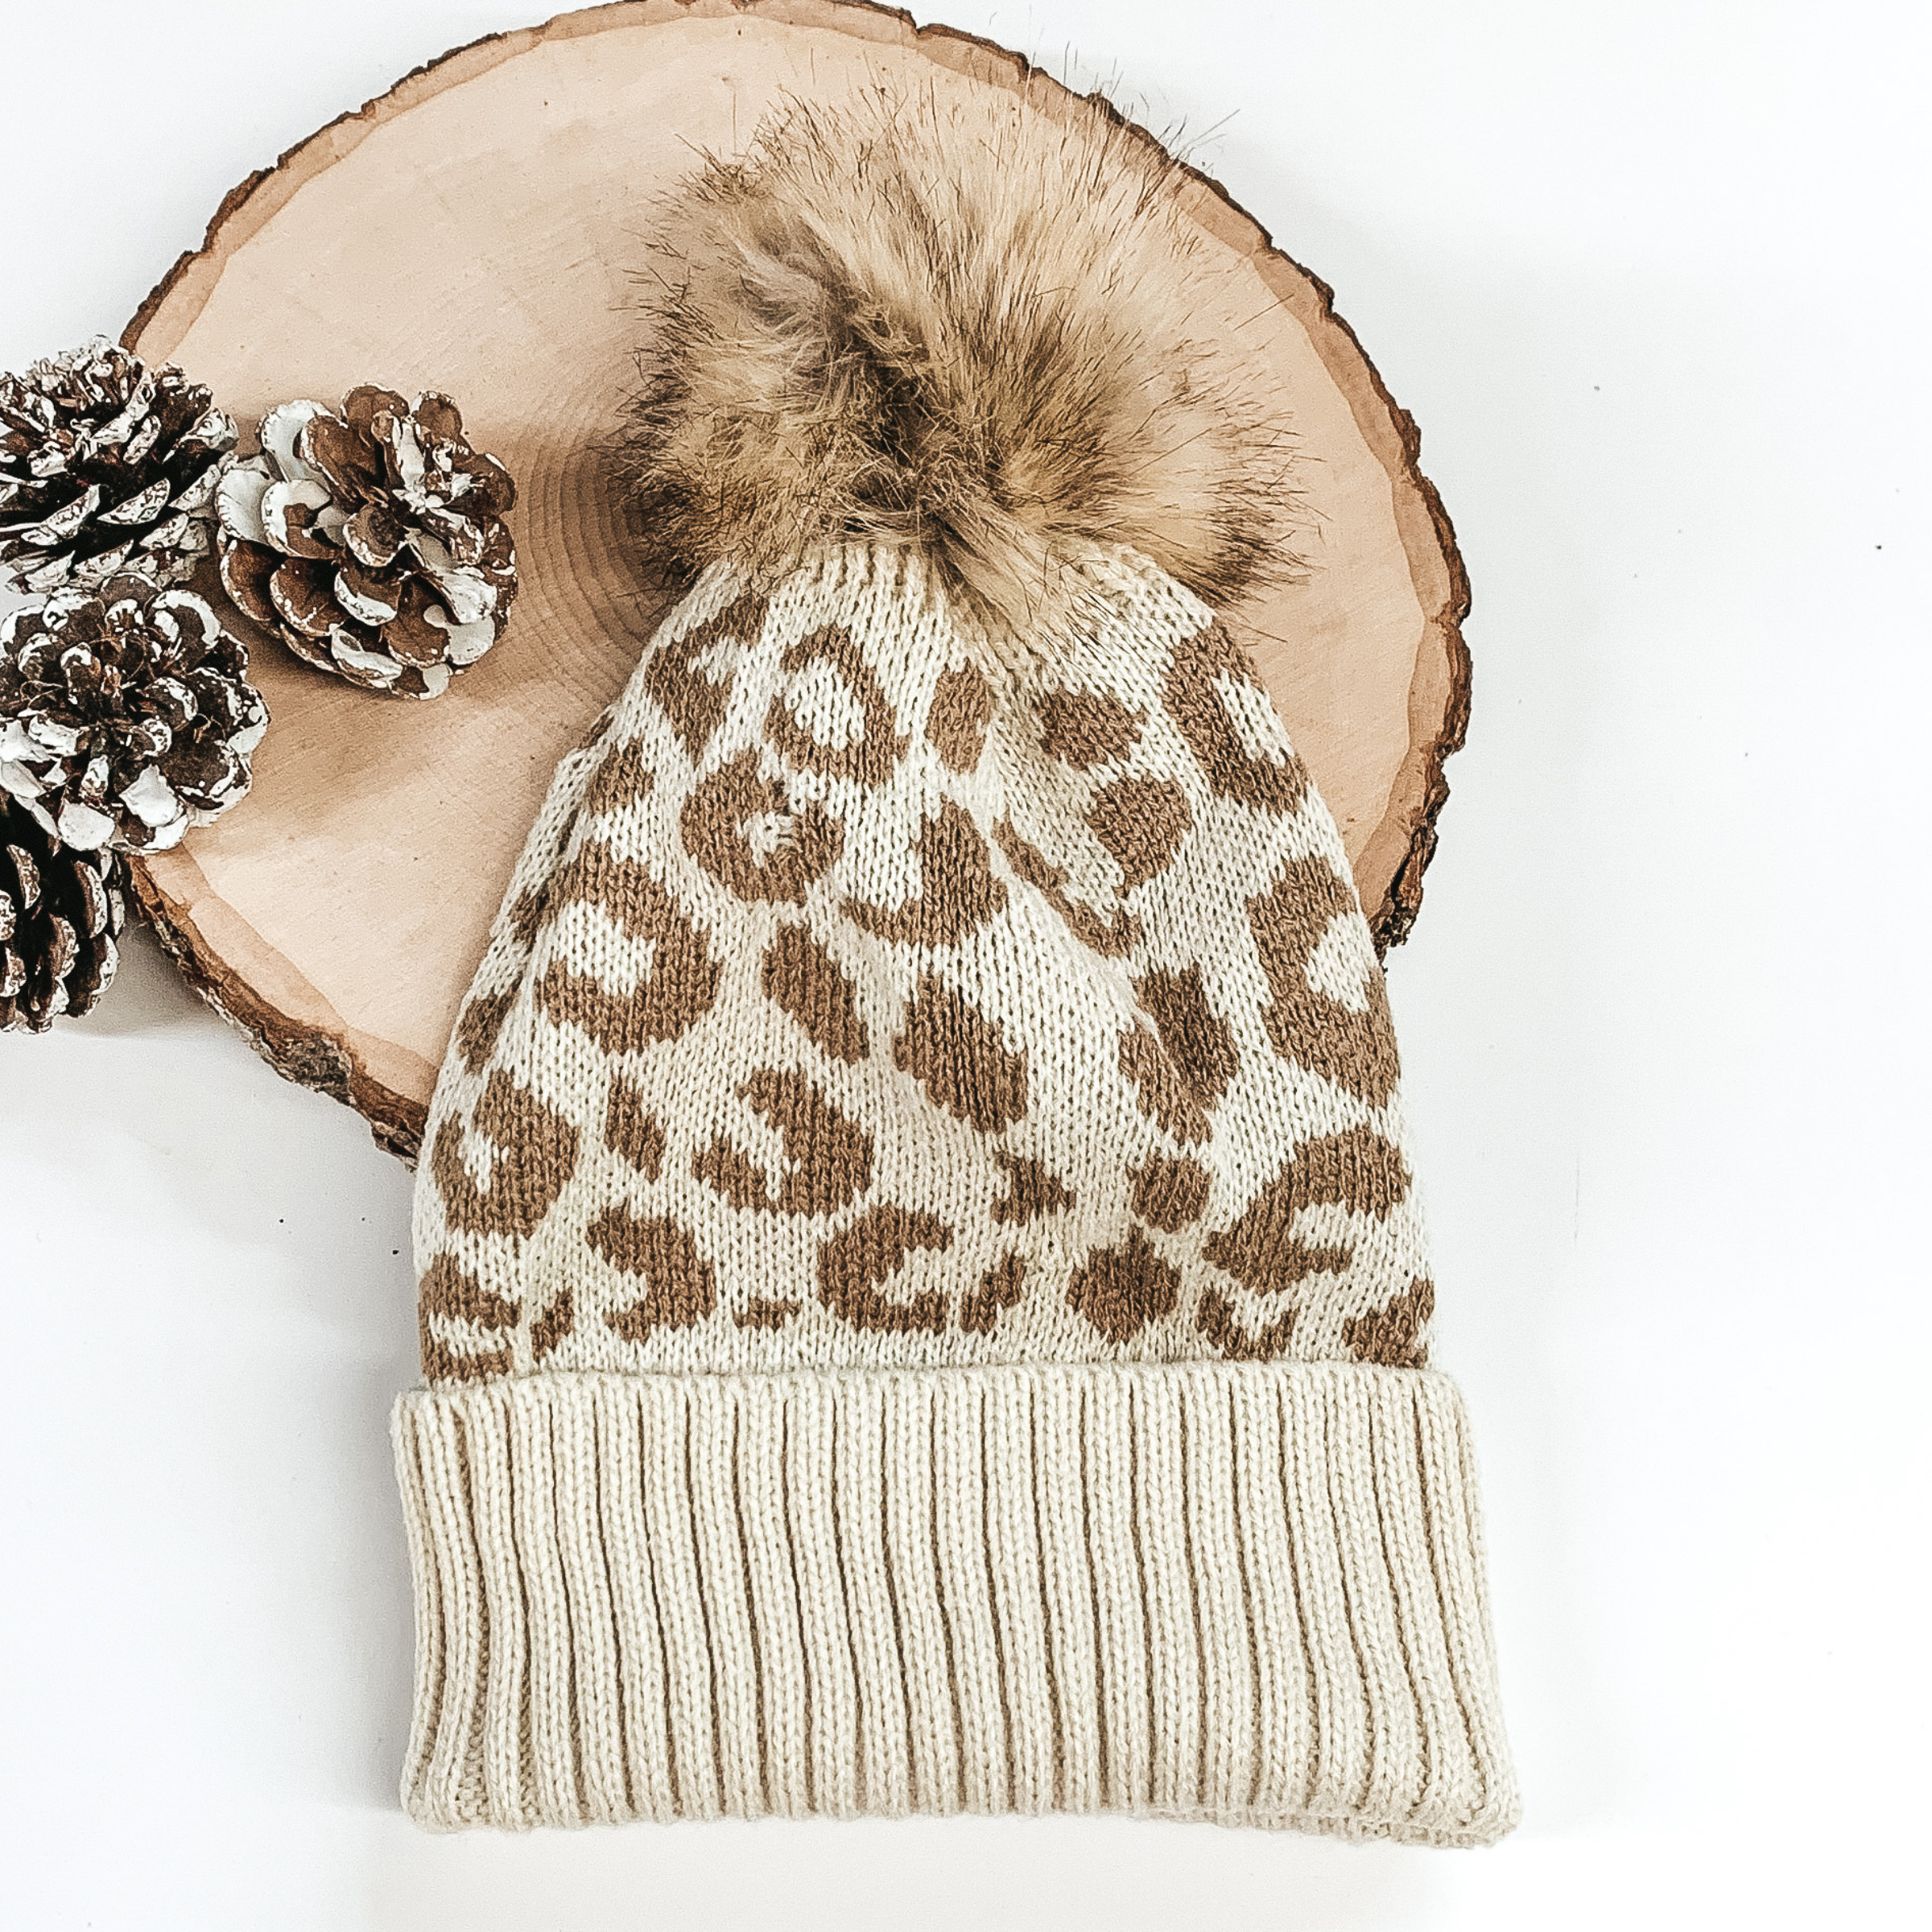 Ivory beanie with tan leopard print and tan pom pom at the top. This beanie is pictured laying on a piece of wood on a white background. 